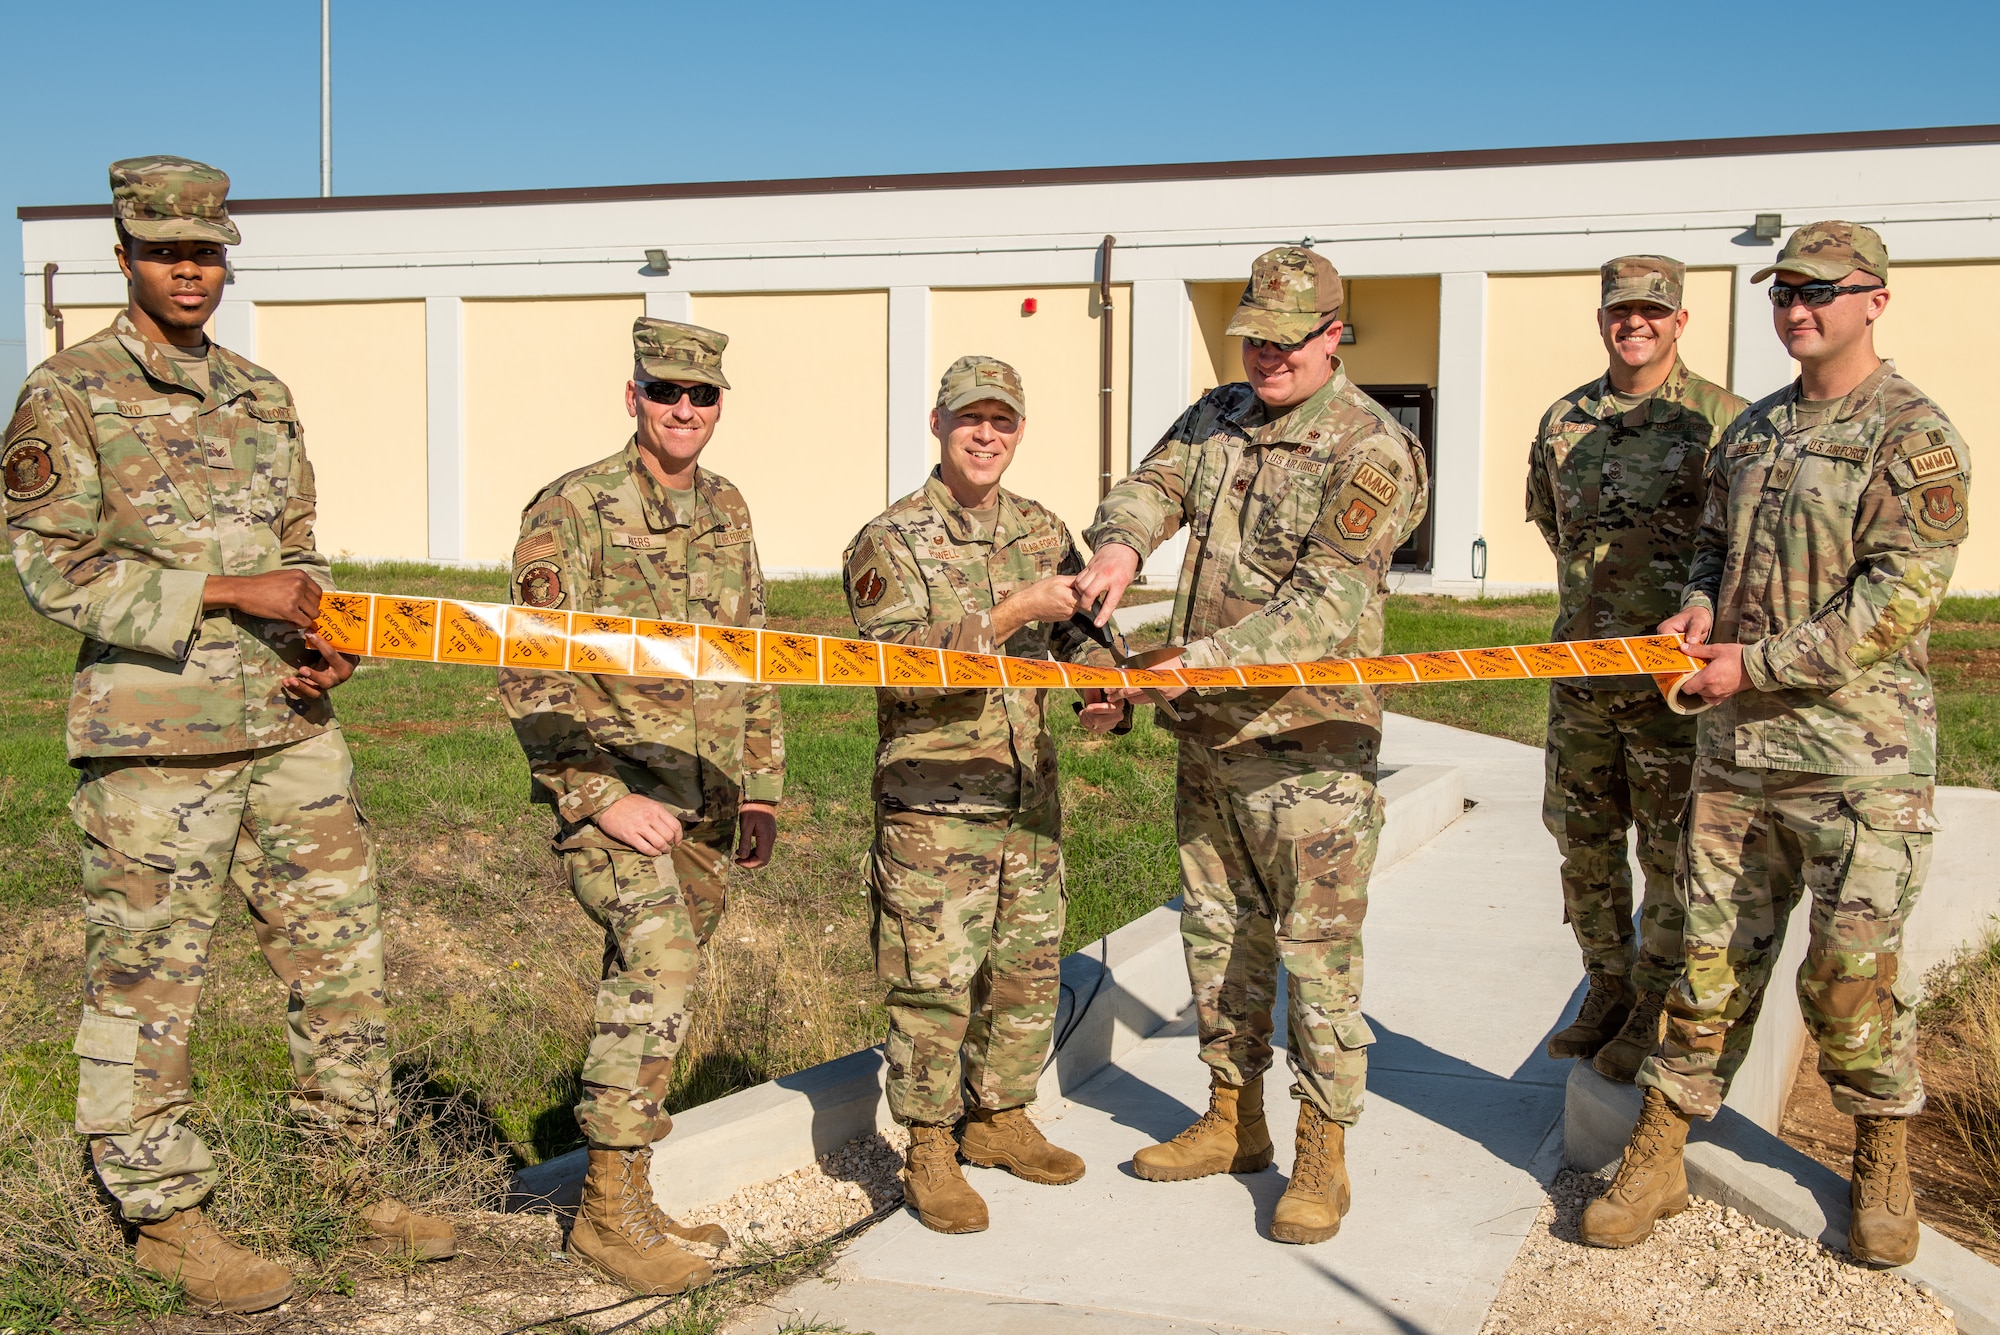 Col. Calvin Powell, 39th Air Base Wing commander, center left, and Maj. Jeffrey Allen, 39th Maintenance Squadron commander, center right, cut the ribbon during the 39th MXS munitions flight building dedication ceremony at Incirlik Air Base, Türkiye, Dec. 19, 2022. The 39th MXS munitions flight building was designed to provide a streamlined means of communication within the ammunitions flight and assist Airmen in building camaraderie and teamwork. The building also provides better protection for munitions assets controlled by the flight and consolidates six sections into a single building, increasing productivity for current and future Airmen. (U.S. Air Force photo by Senior Airman David D. McLoney)